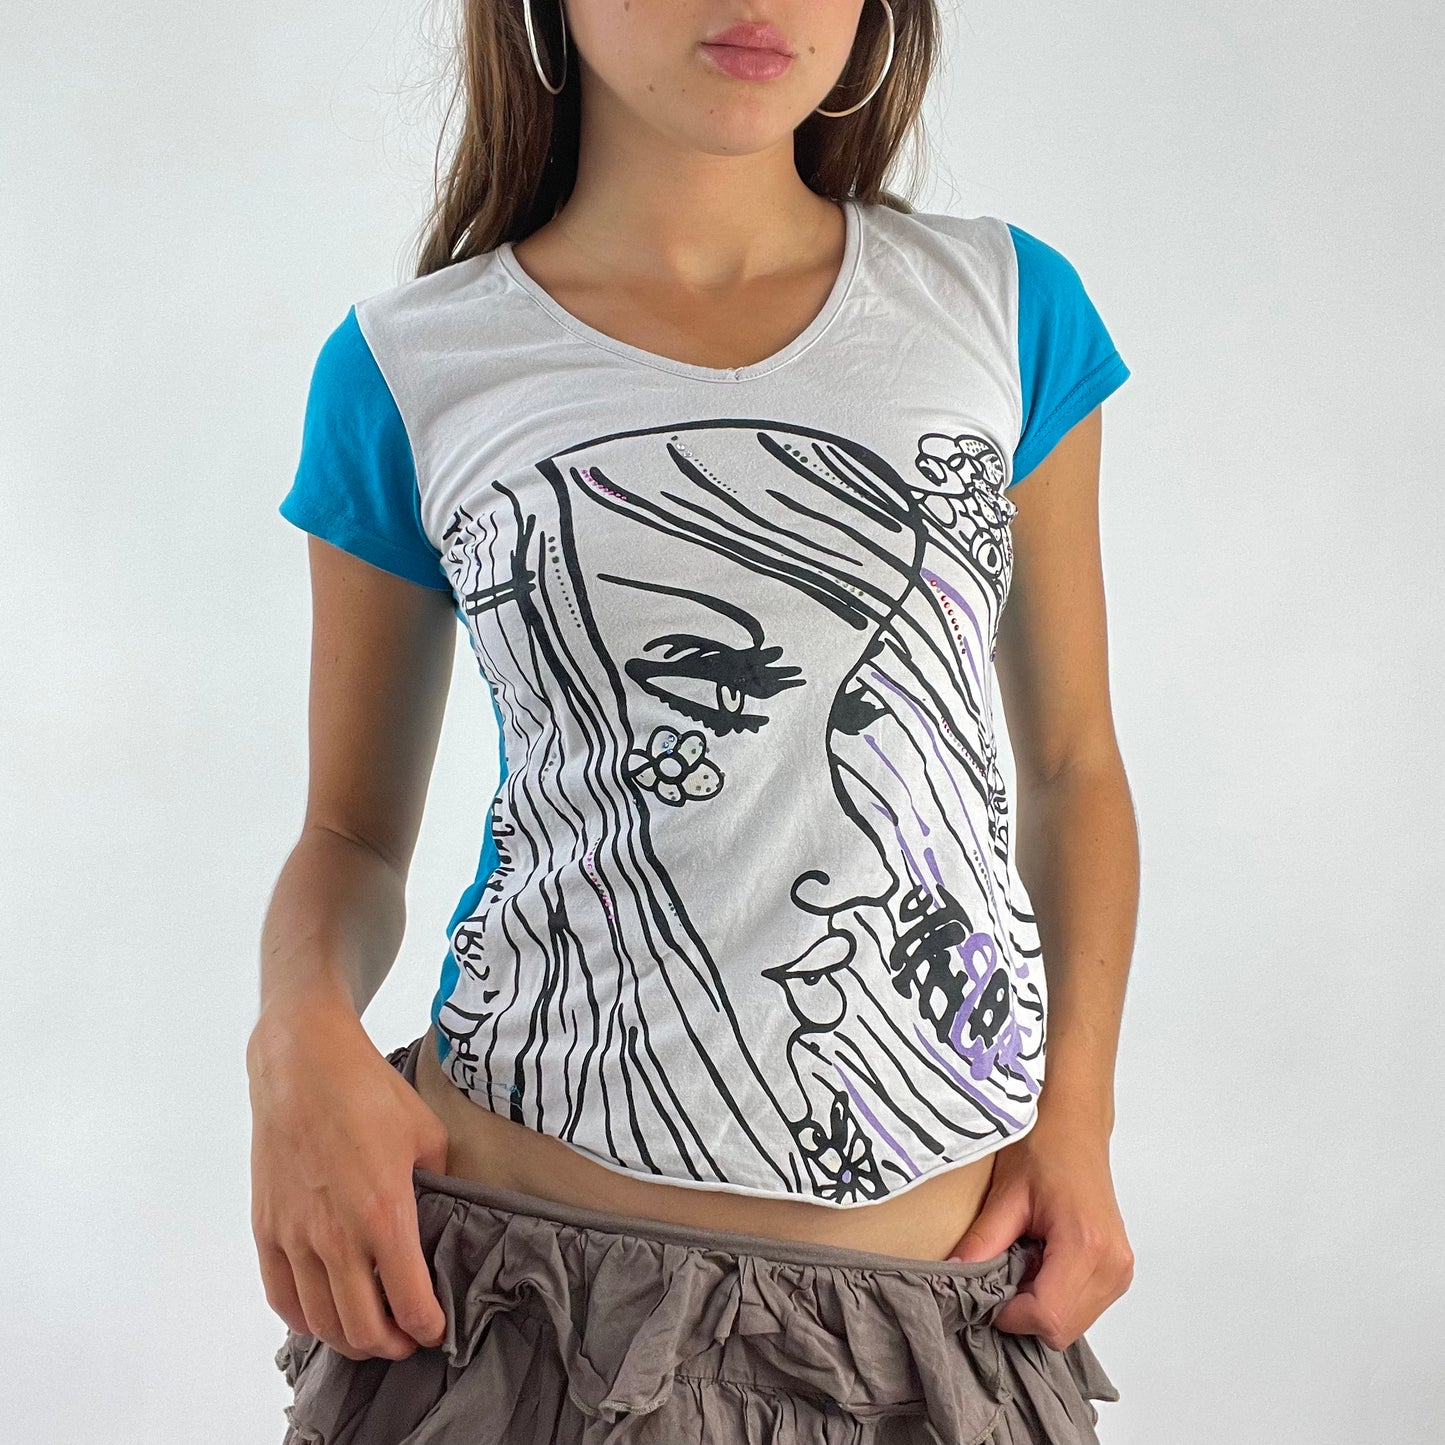 SUMMER ‘IT GIRL’ DROP | blue graphic baby t - size S